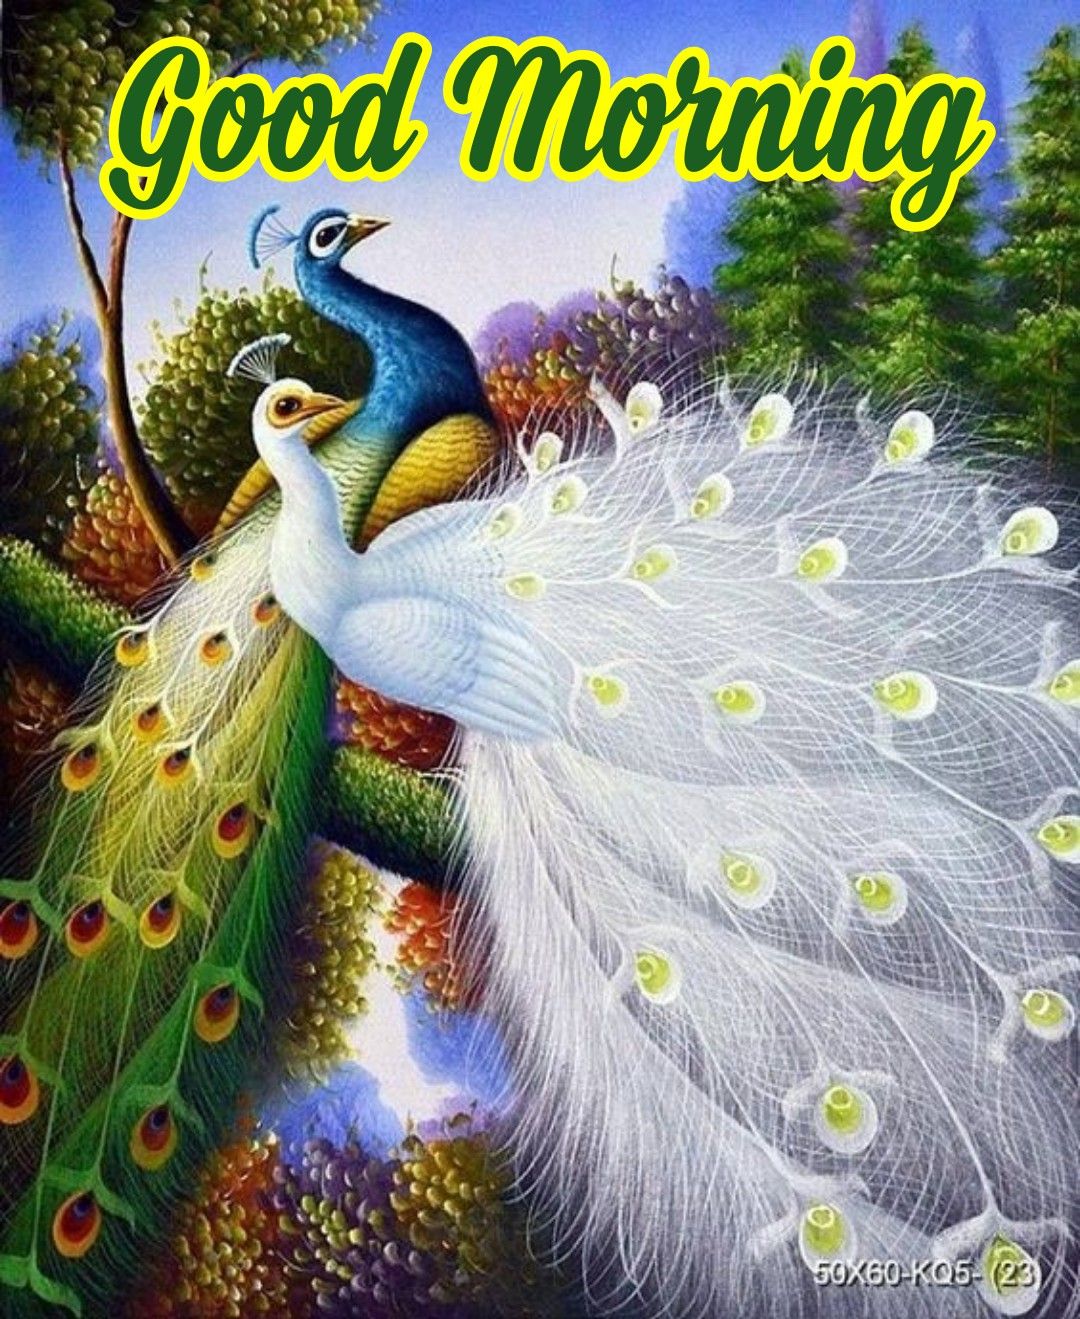 30+ Good morning Peacock Images & Wishes - Good Morning Wishes